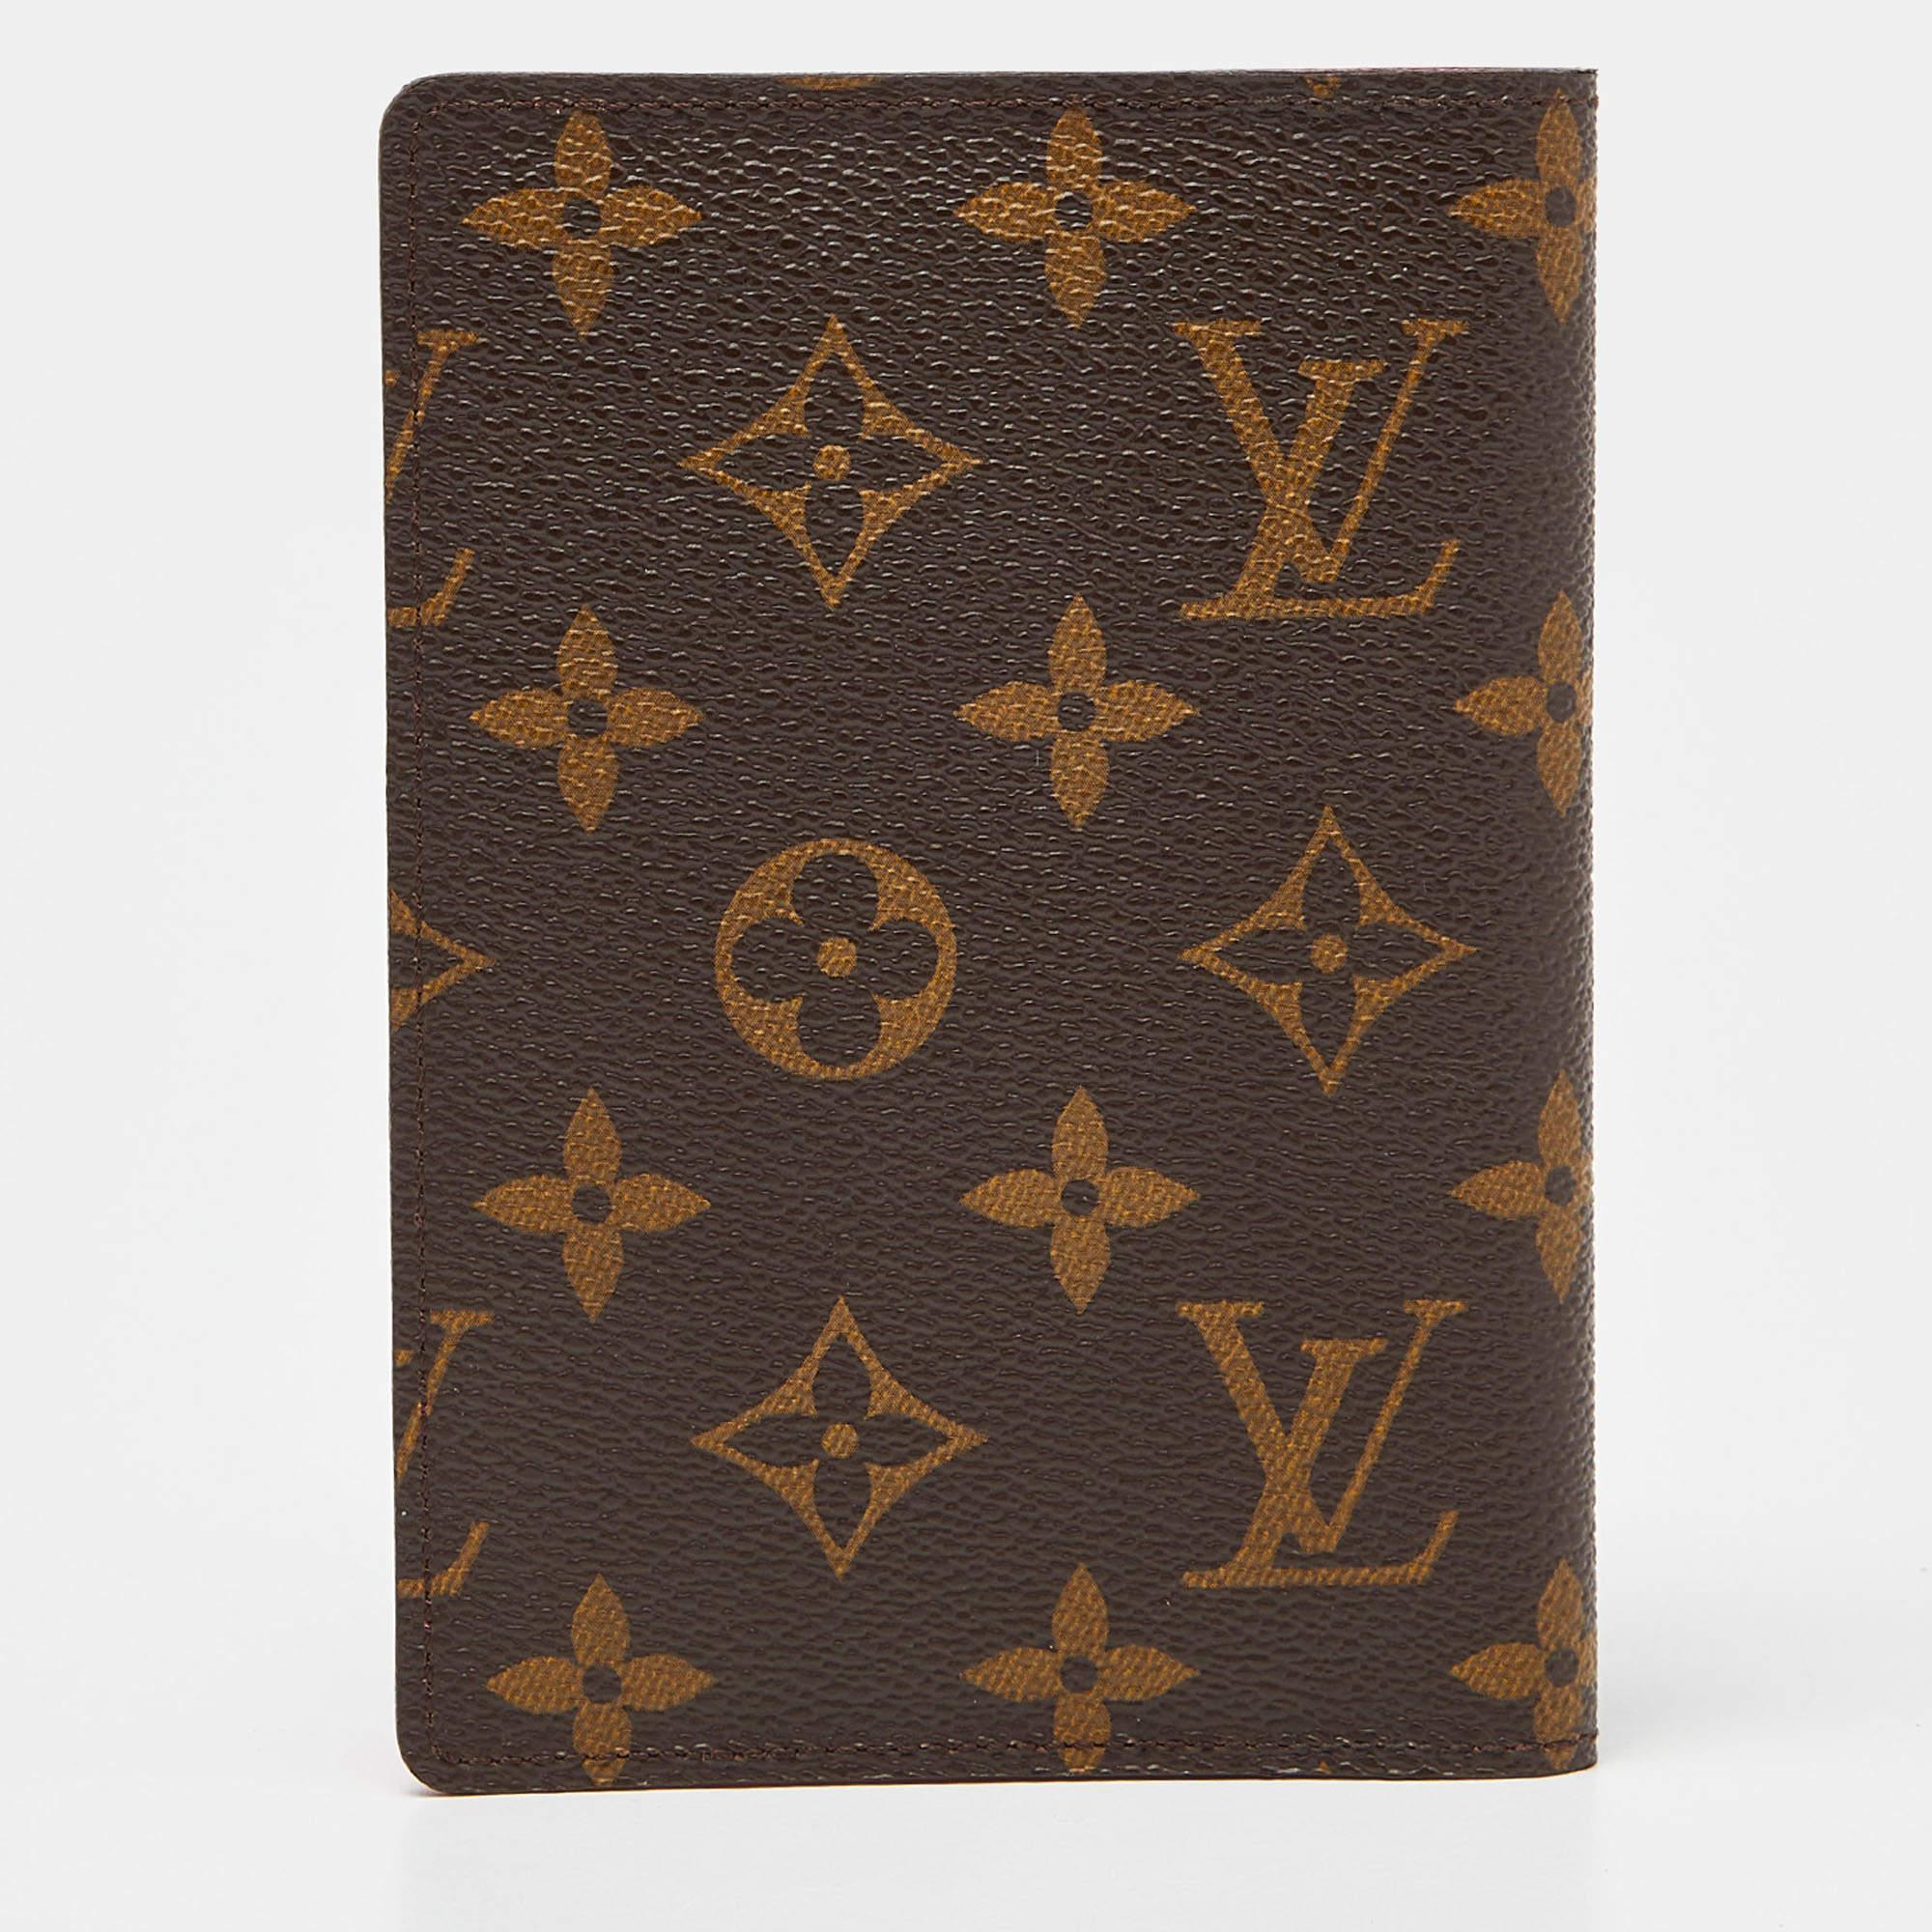 The Louis Vuitton My LV Heritage passport cover is a luxurious travel accessory. Crafted from the iconic LV monogram canvas, it features a sleek design, multiple card slots, and a passport compartment, making it an elegant and practical choice for